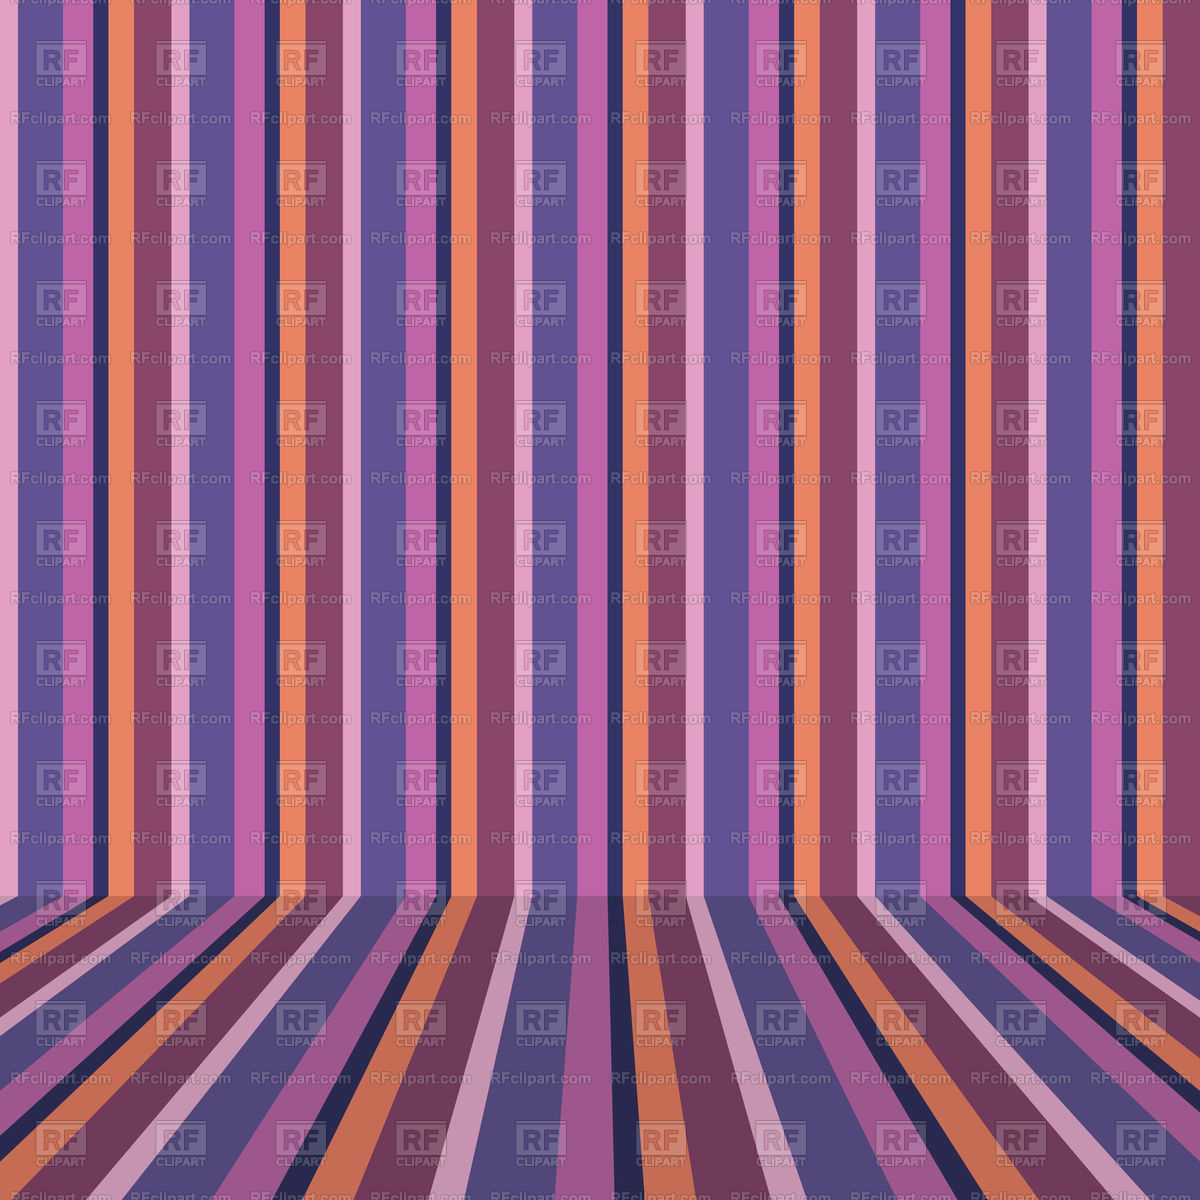 Striped Wallpaper On The Wall Vector Image Vector Illustration - Vector Graphics - HD Wallpaper 